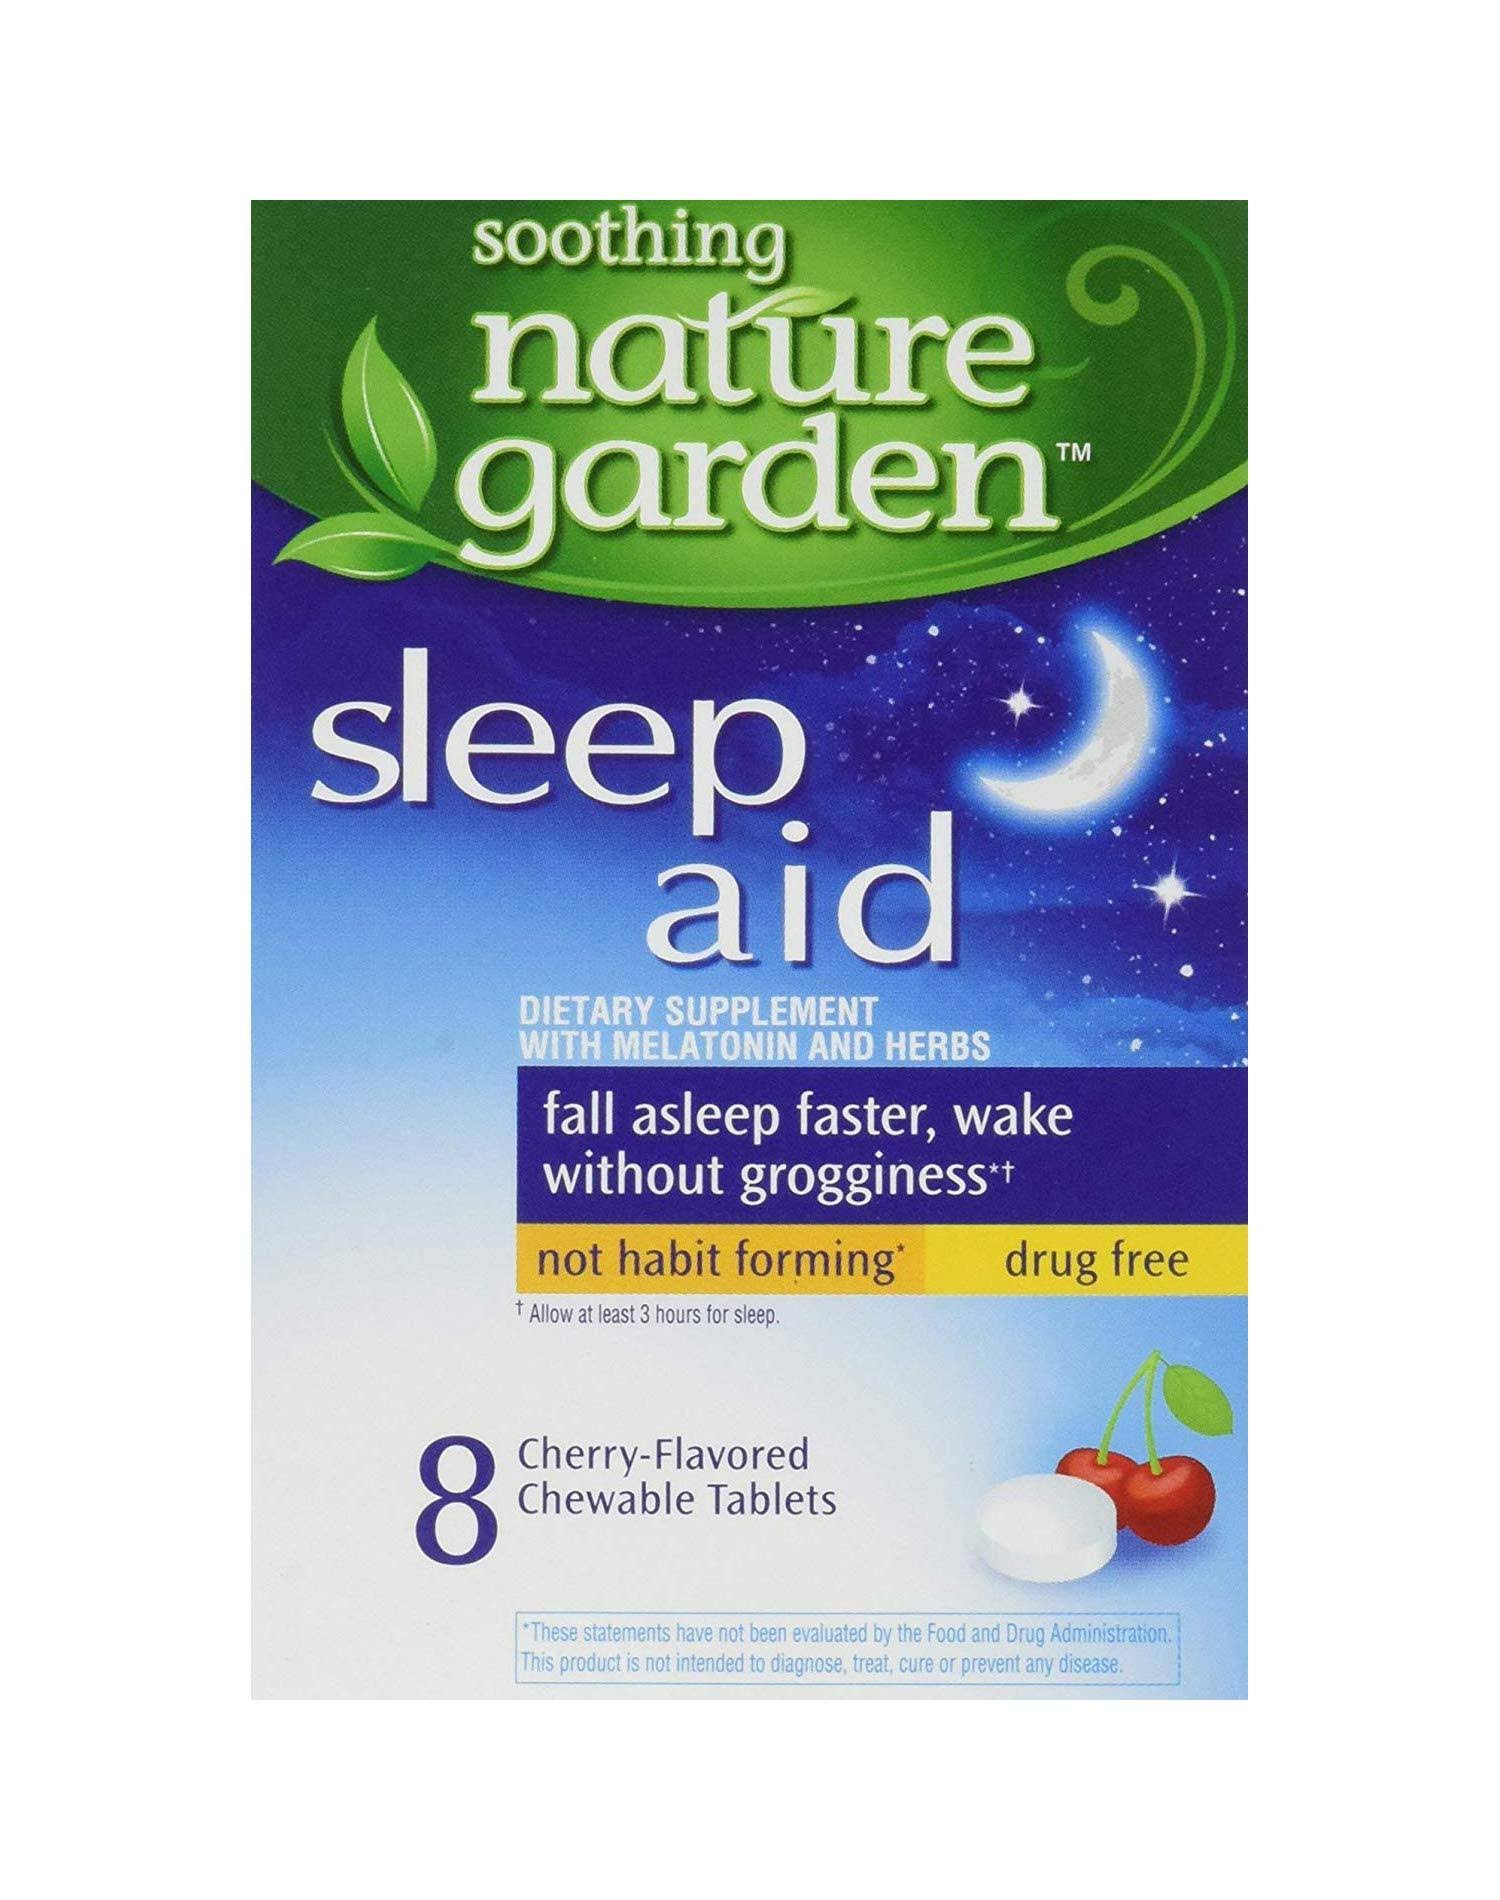 Soothing Nature Garden Sleep Aid Remedy Chewable Tablets - 8ct